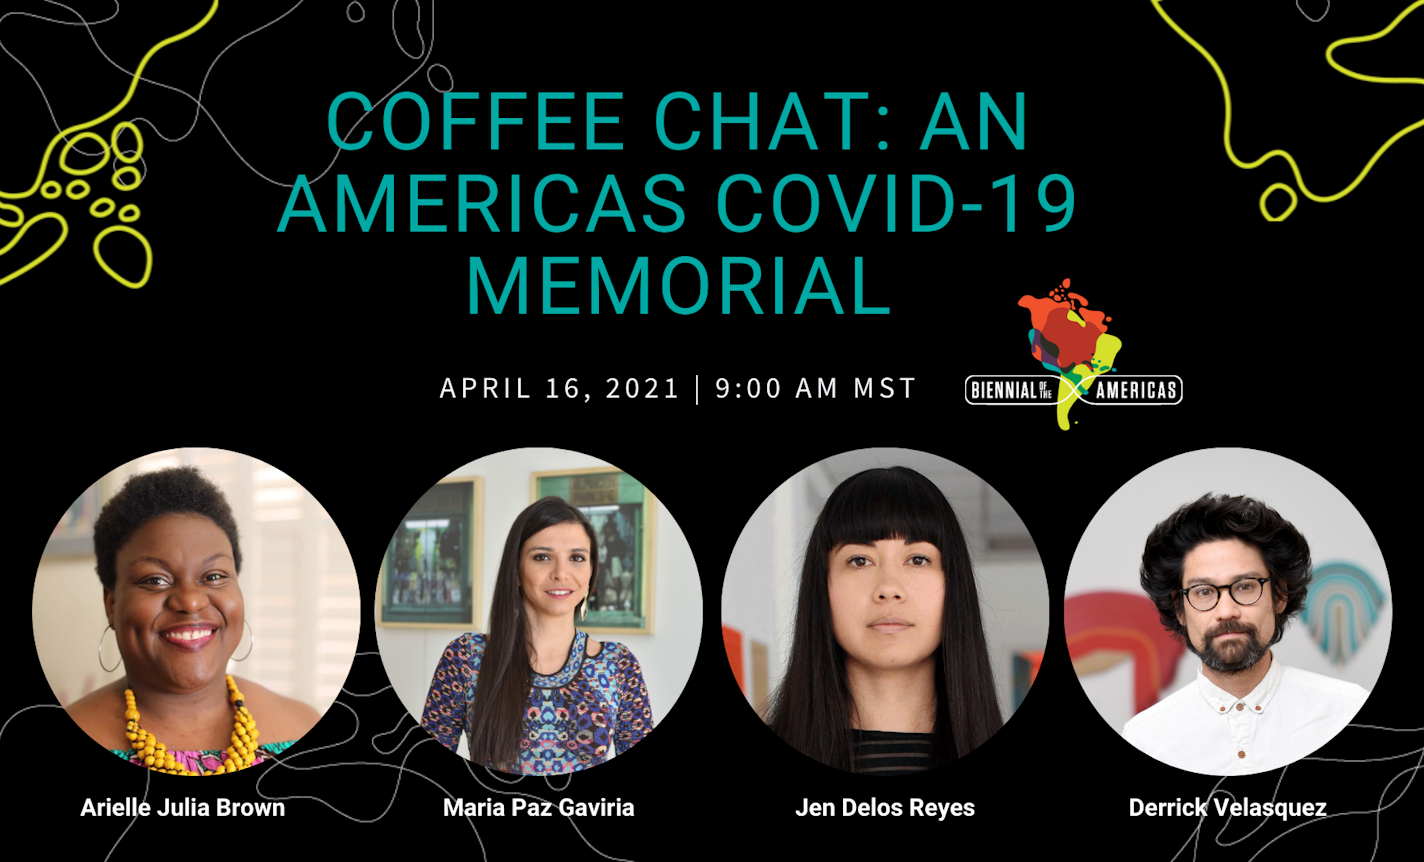 Coffee Chat: An Americas COVID-19 Memorial